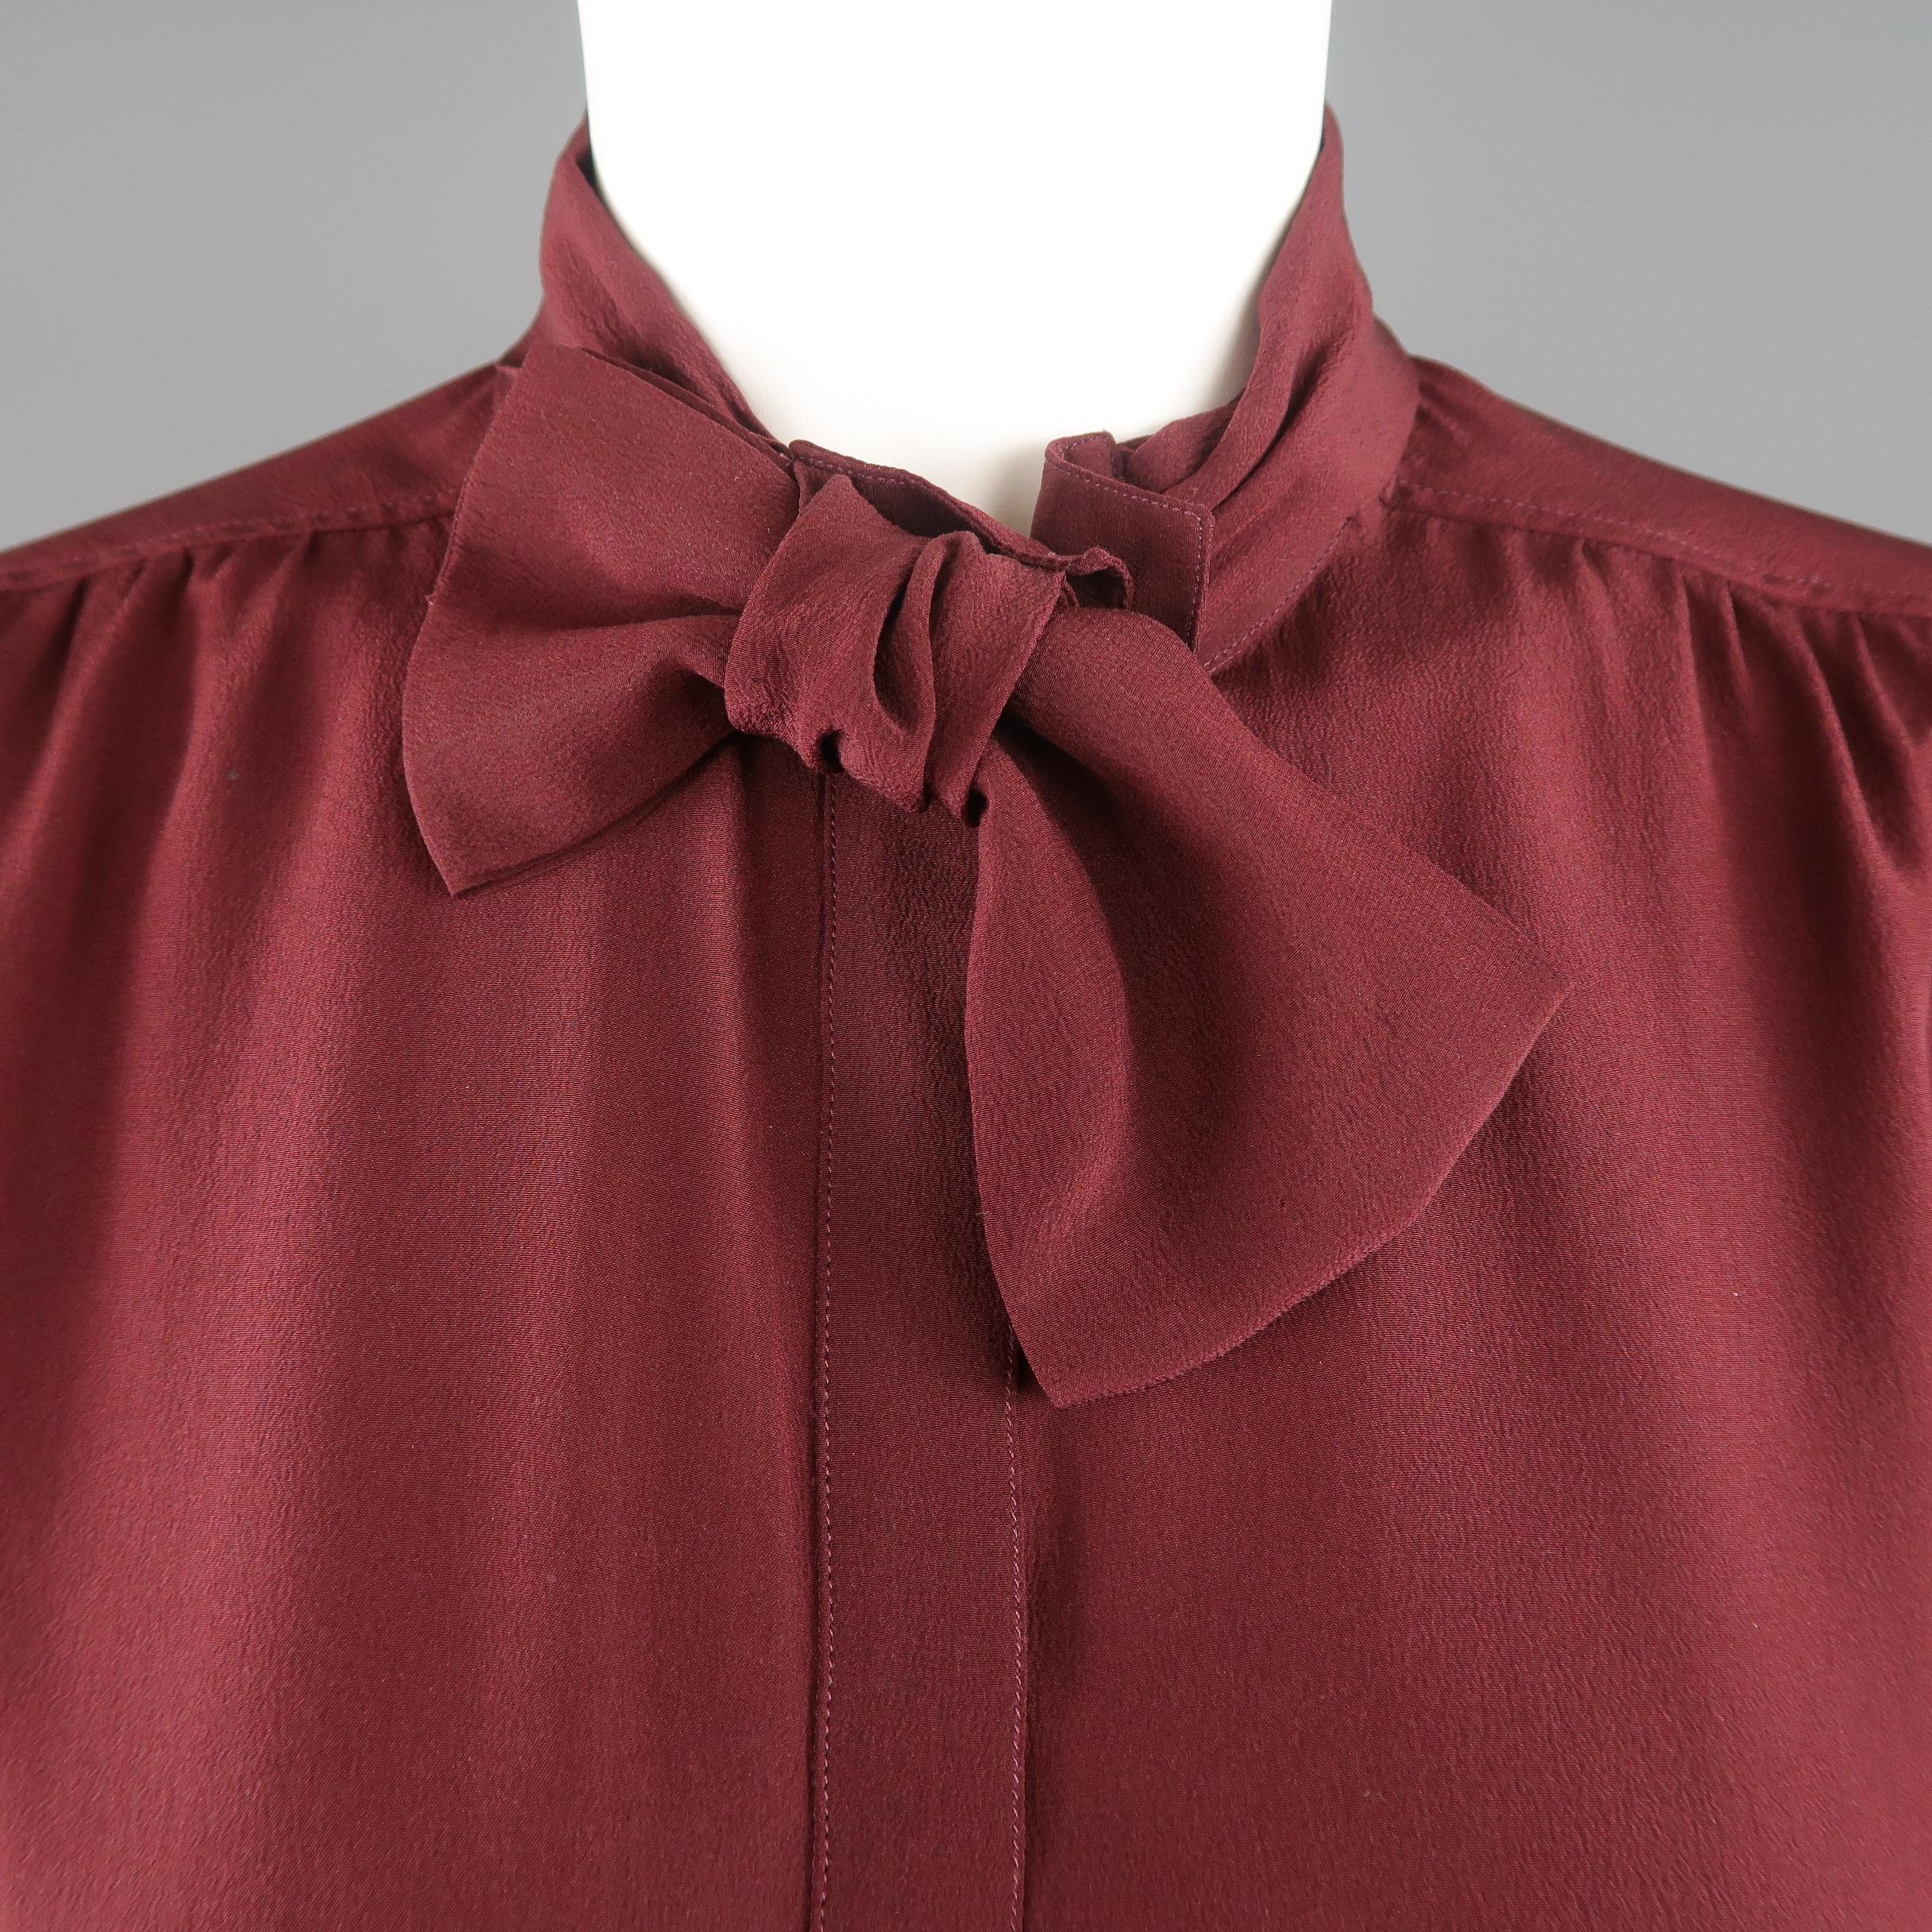 BURBERRY PRORSUM blouse comes in burgundy red silk crepe with a hidden placket front and bow collar. Stain on back. As-is. Made in Italy.
 
Fair Pre-Owned Condition.
Marked: IT 42
 
Measurements:
 
Shoulder: 15 in.
Bust: 42 in.
Sleeve: 25